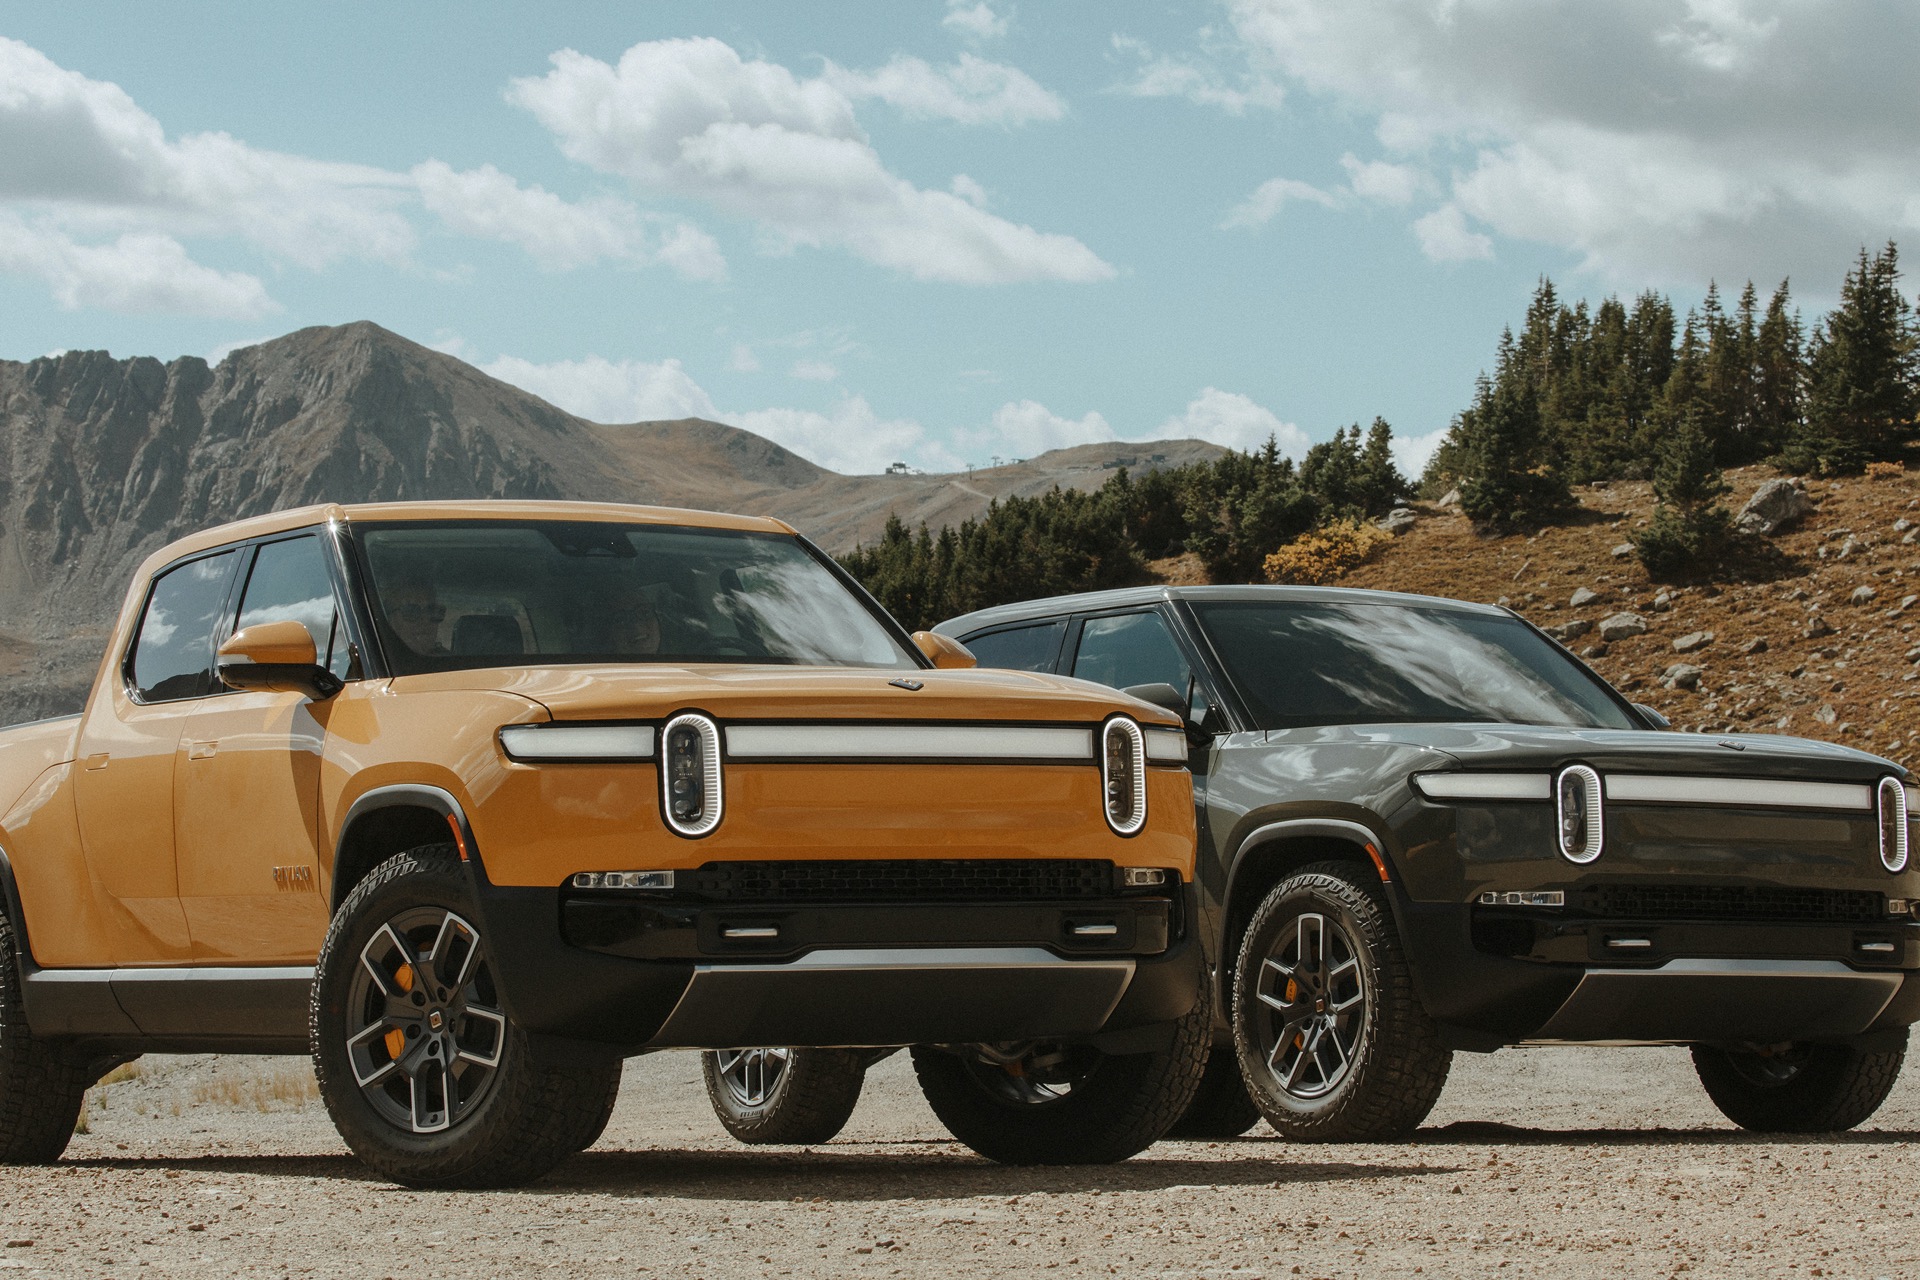 Ford drops its plans to develop EVs with RivianFord drops its plans to develop EVs with Rivian